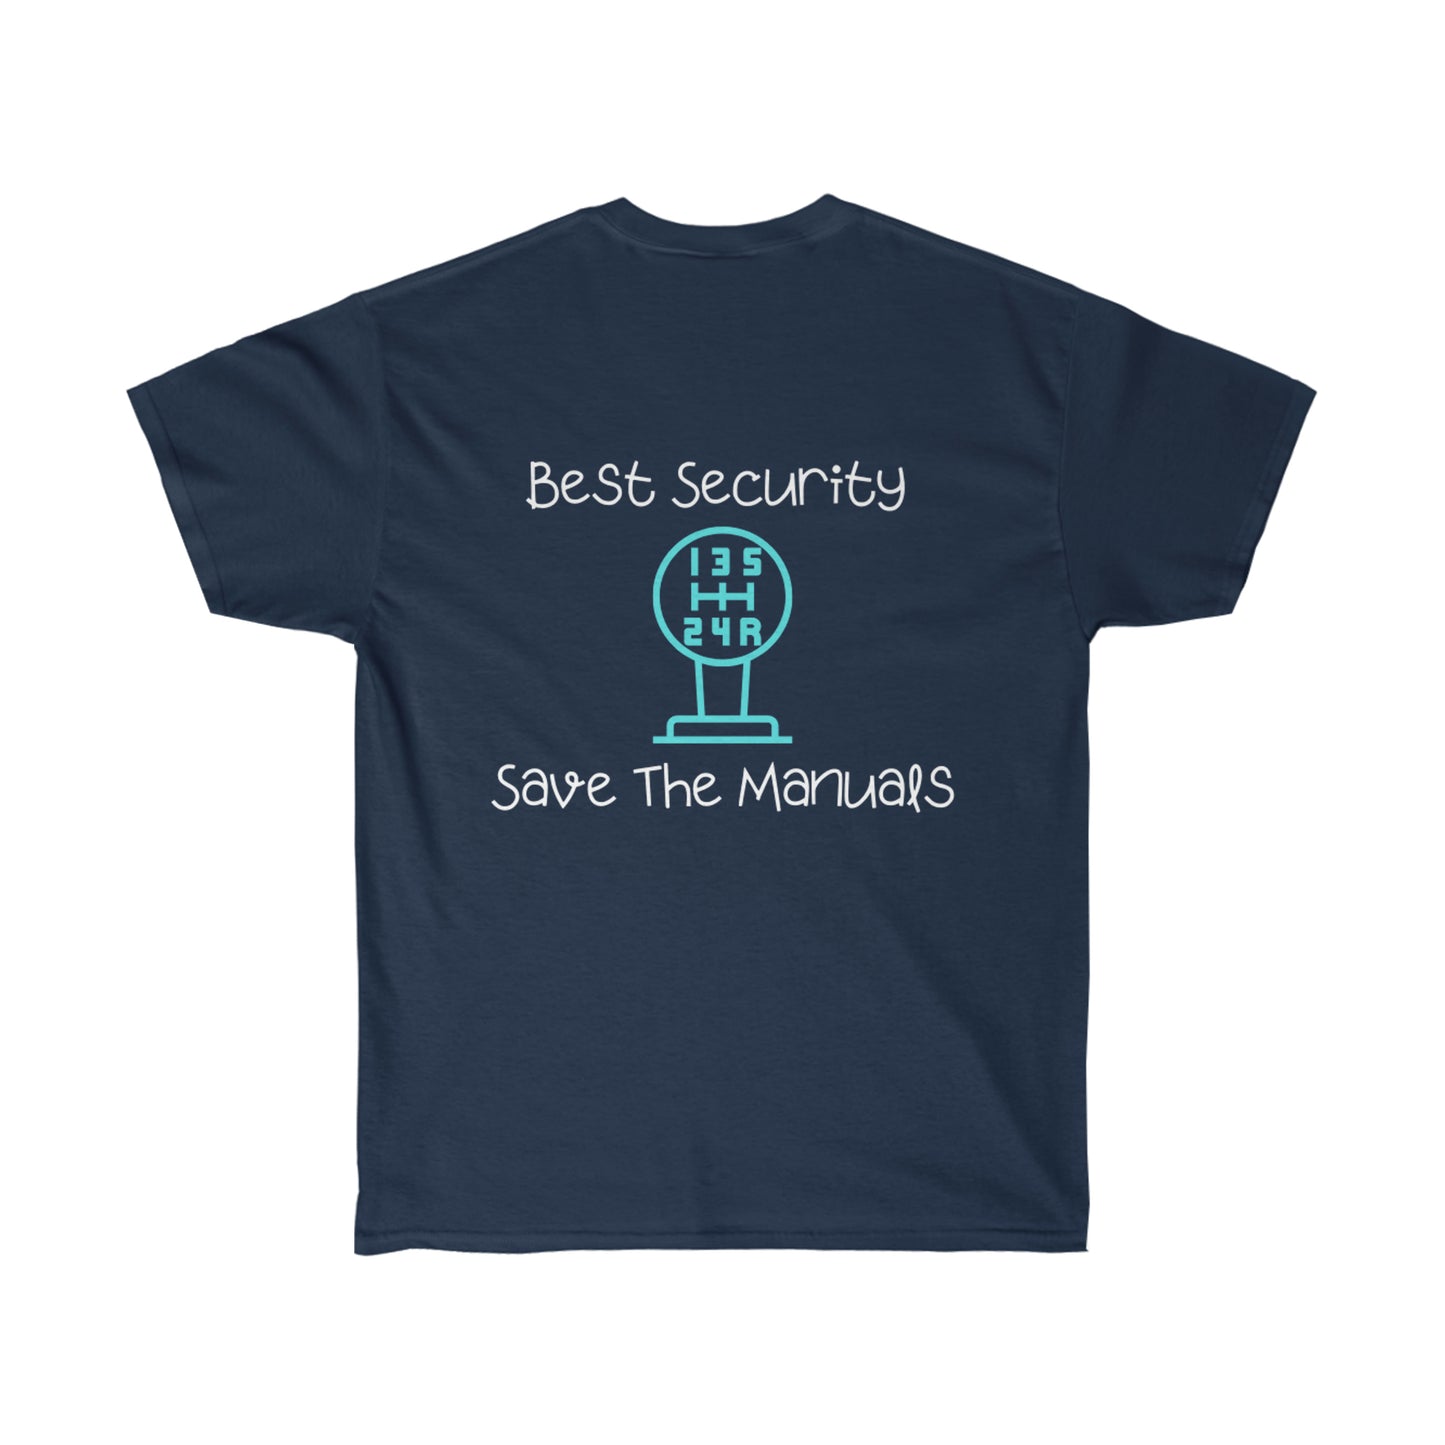 Save the Manuals Cotton Tee